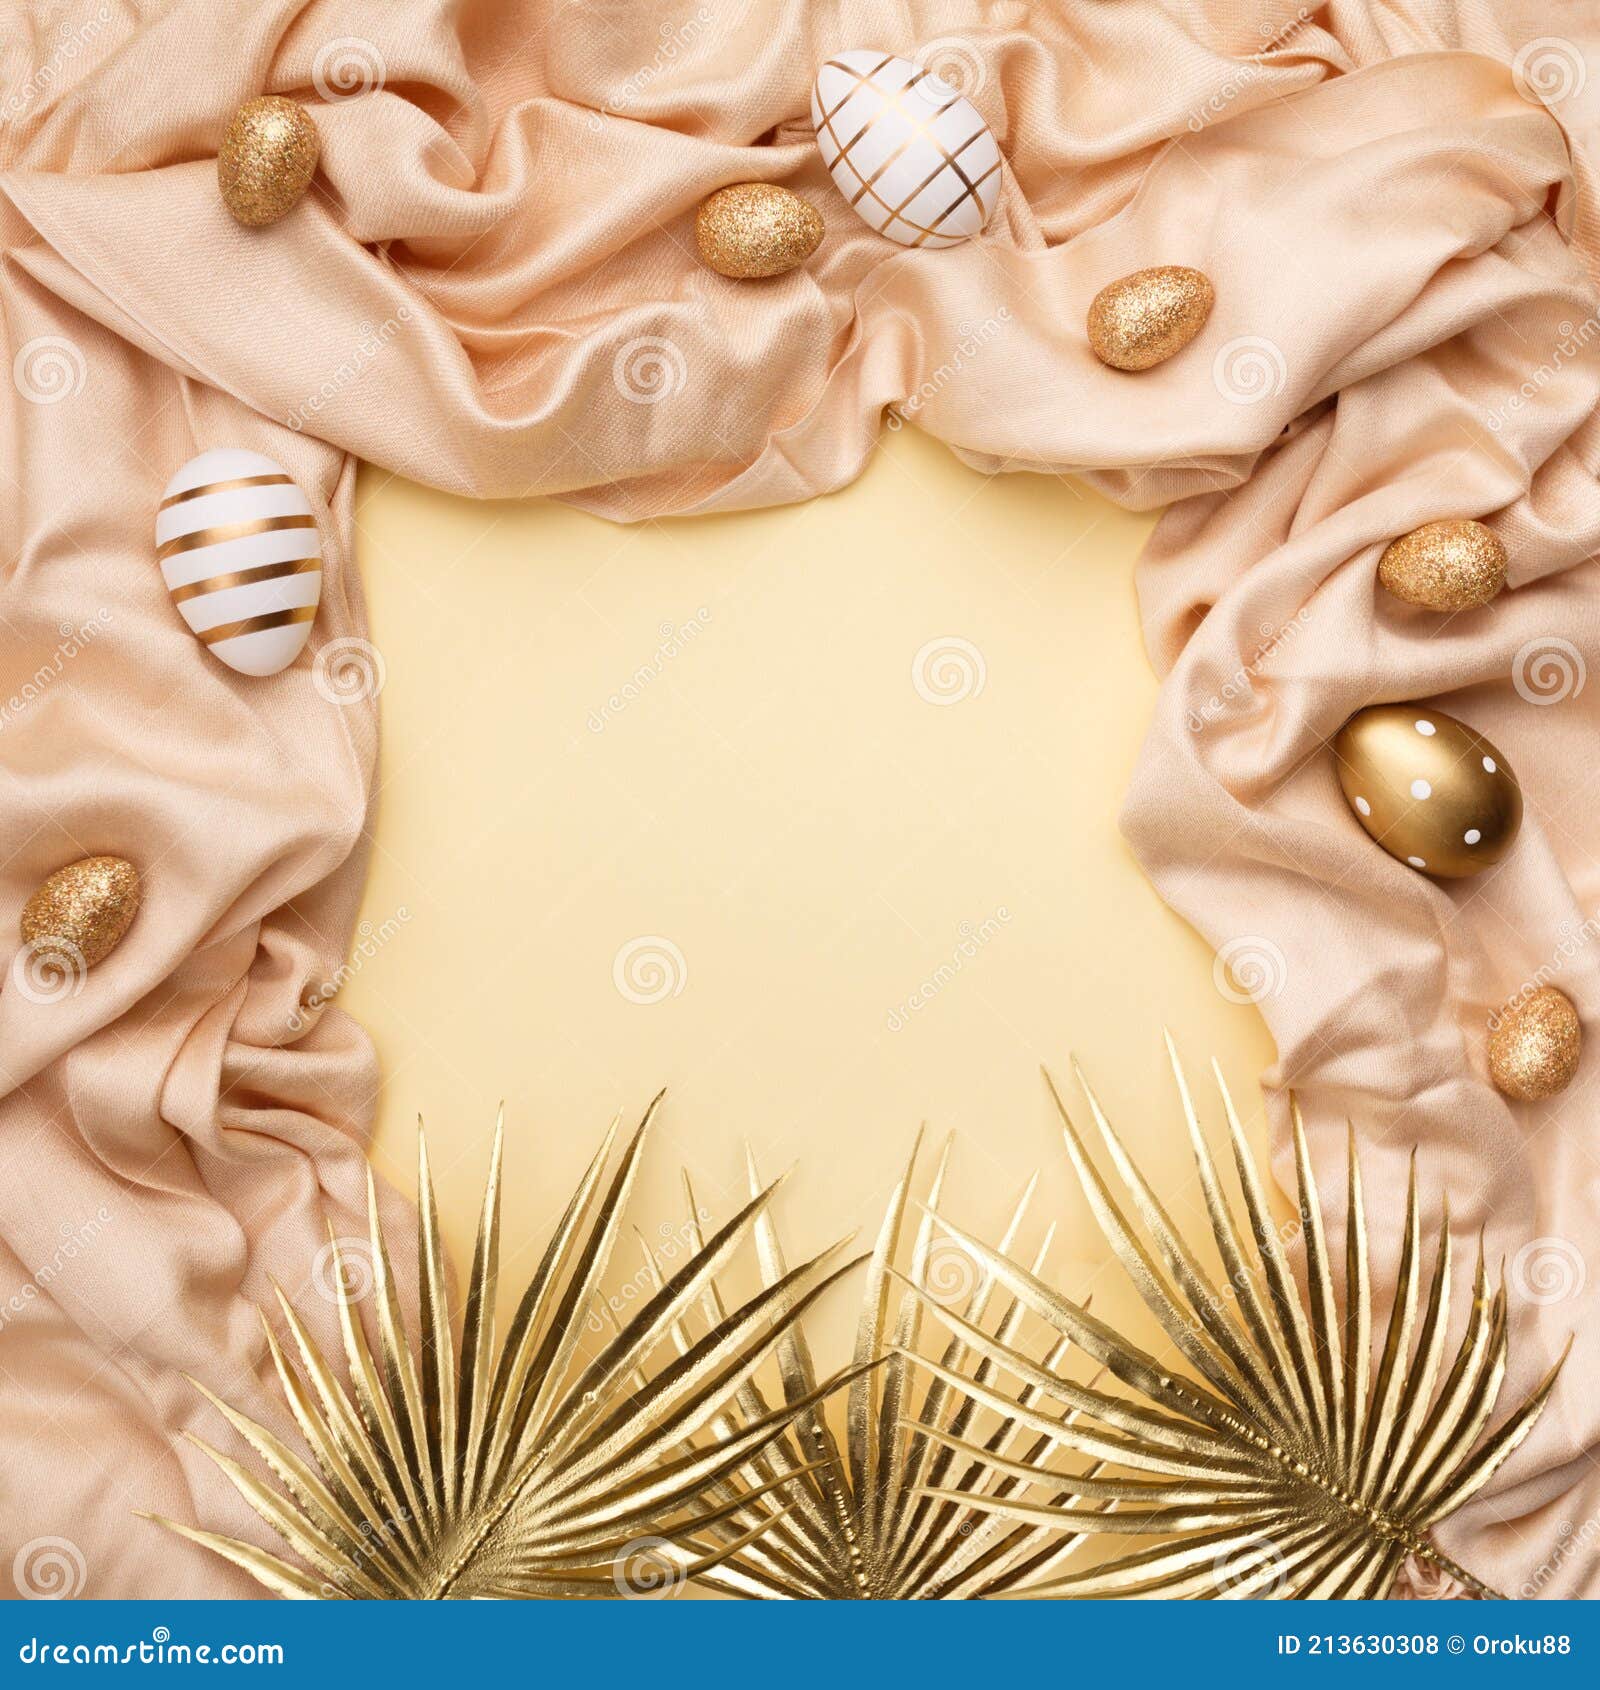 minimal concept palm leaves with a golden easter eggs on a silk or saten fabric against pastel background with copy space